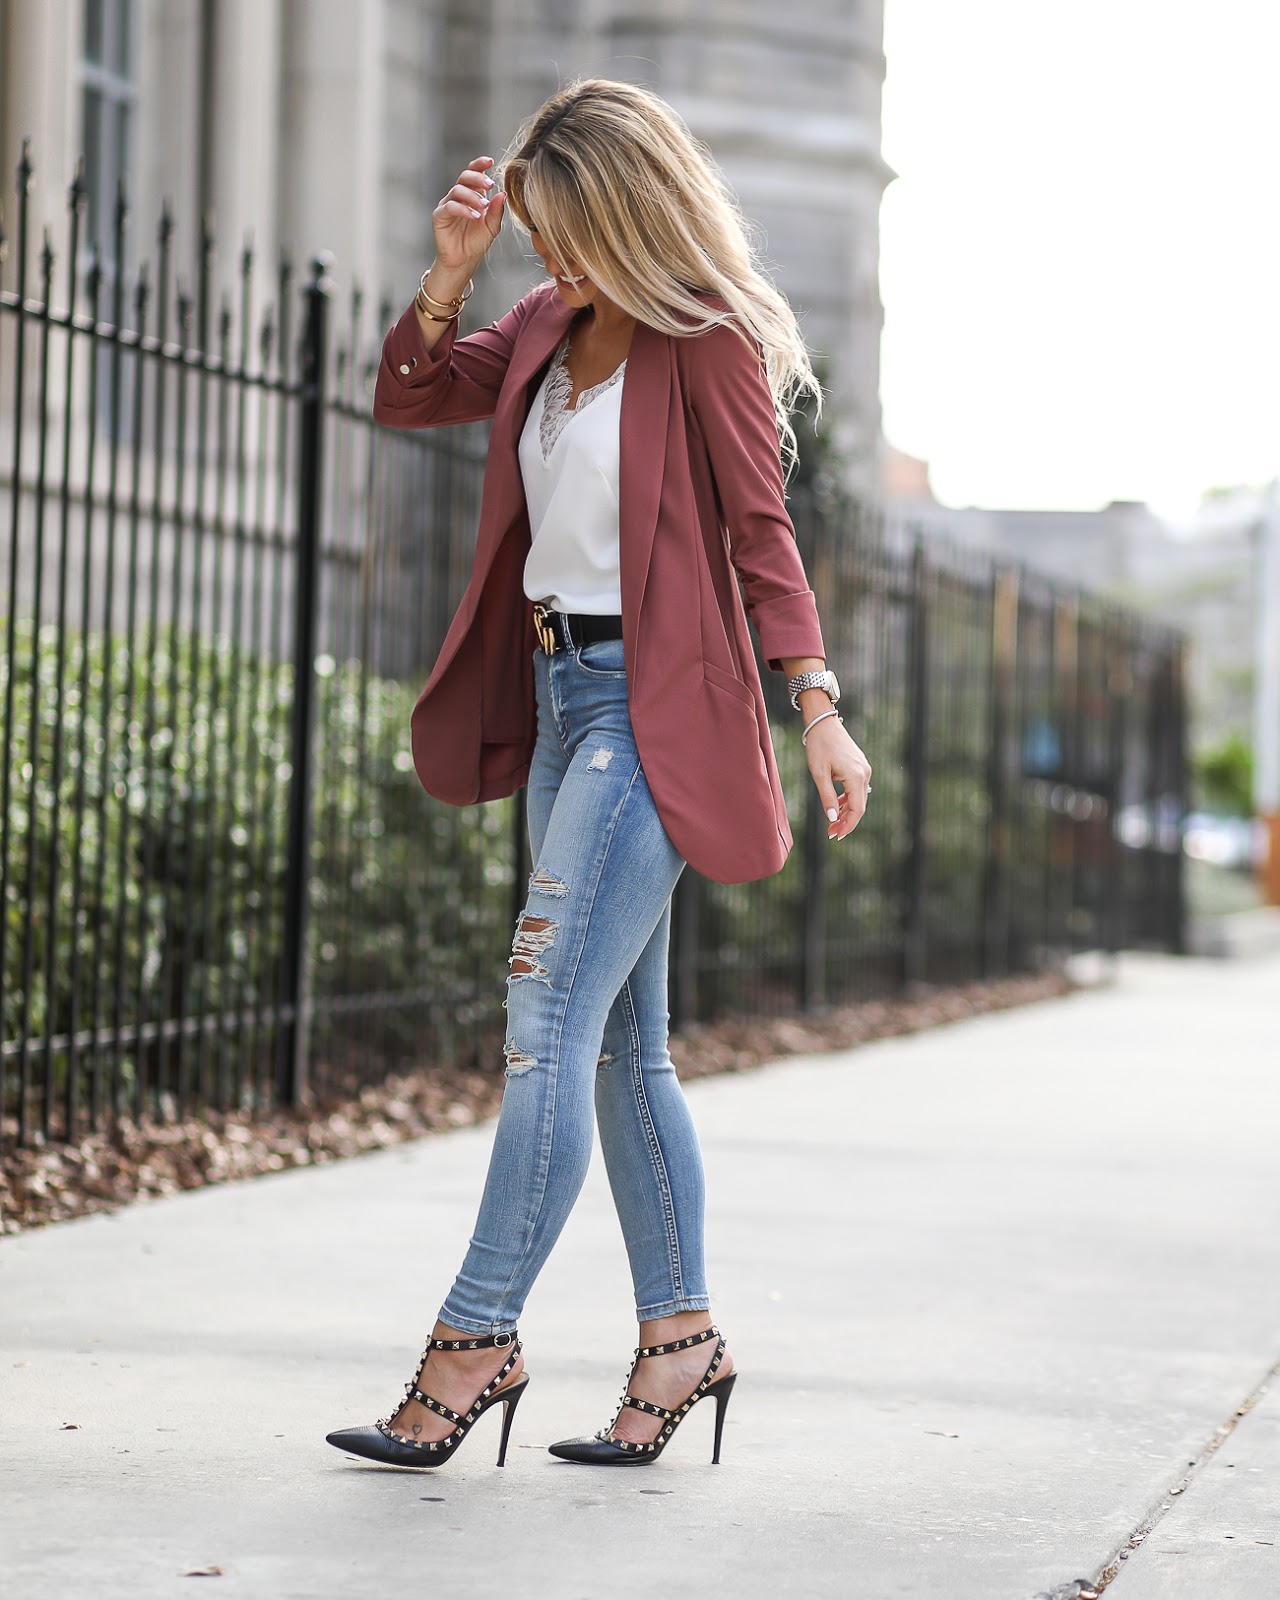 How to dress chic casual, Outfit